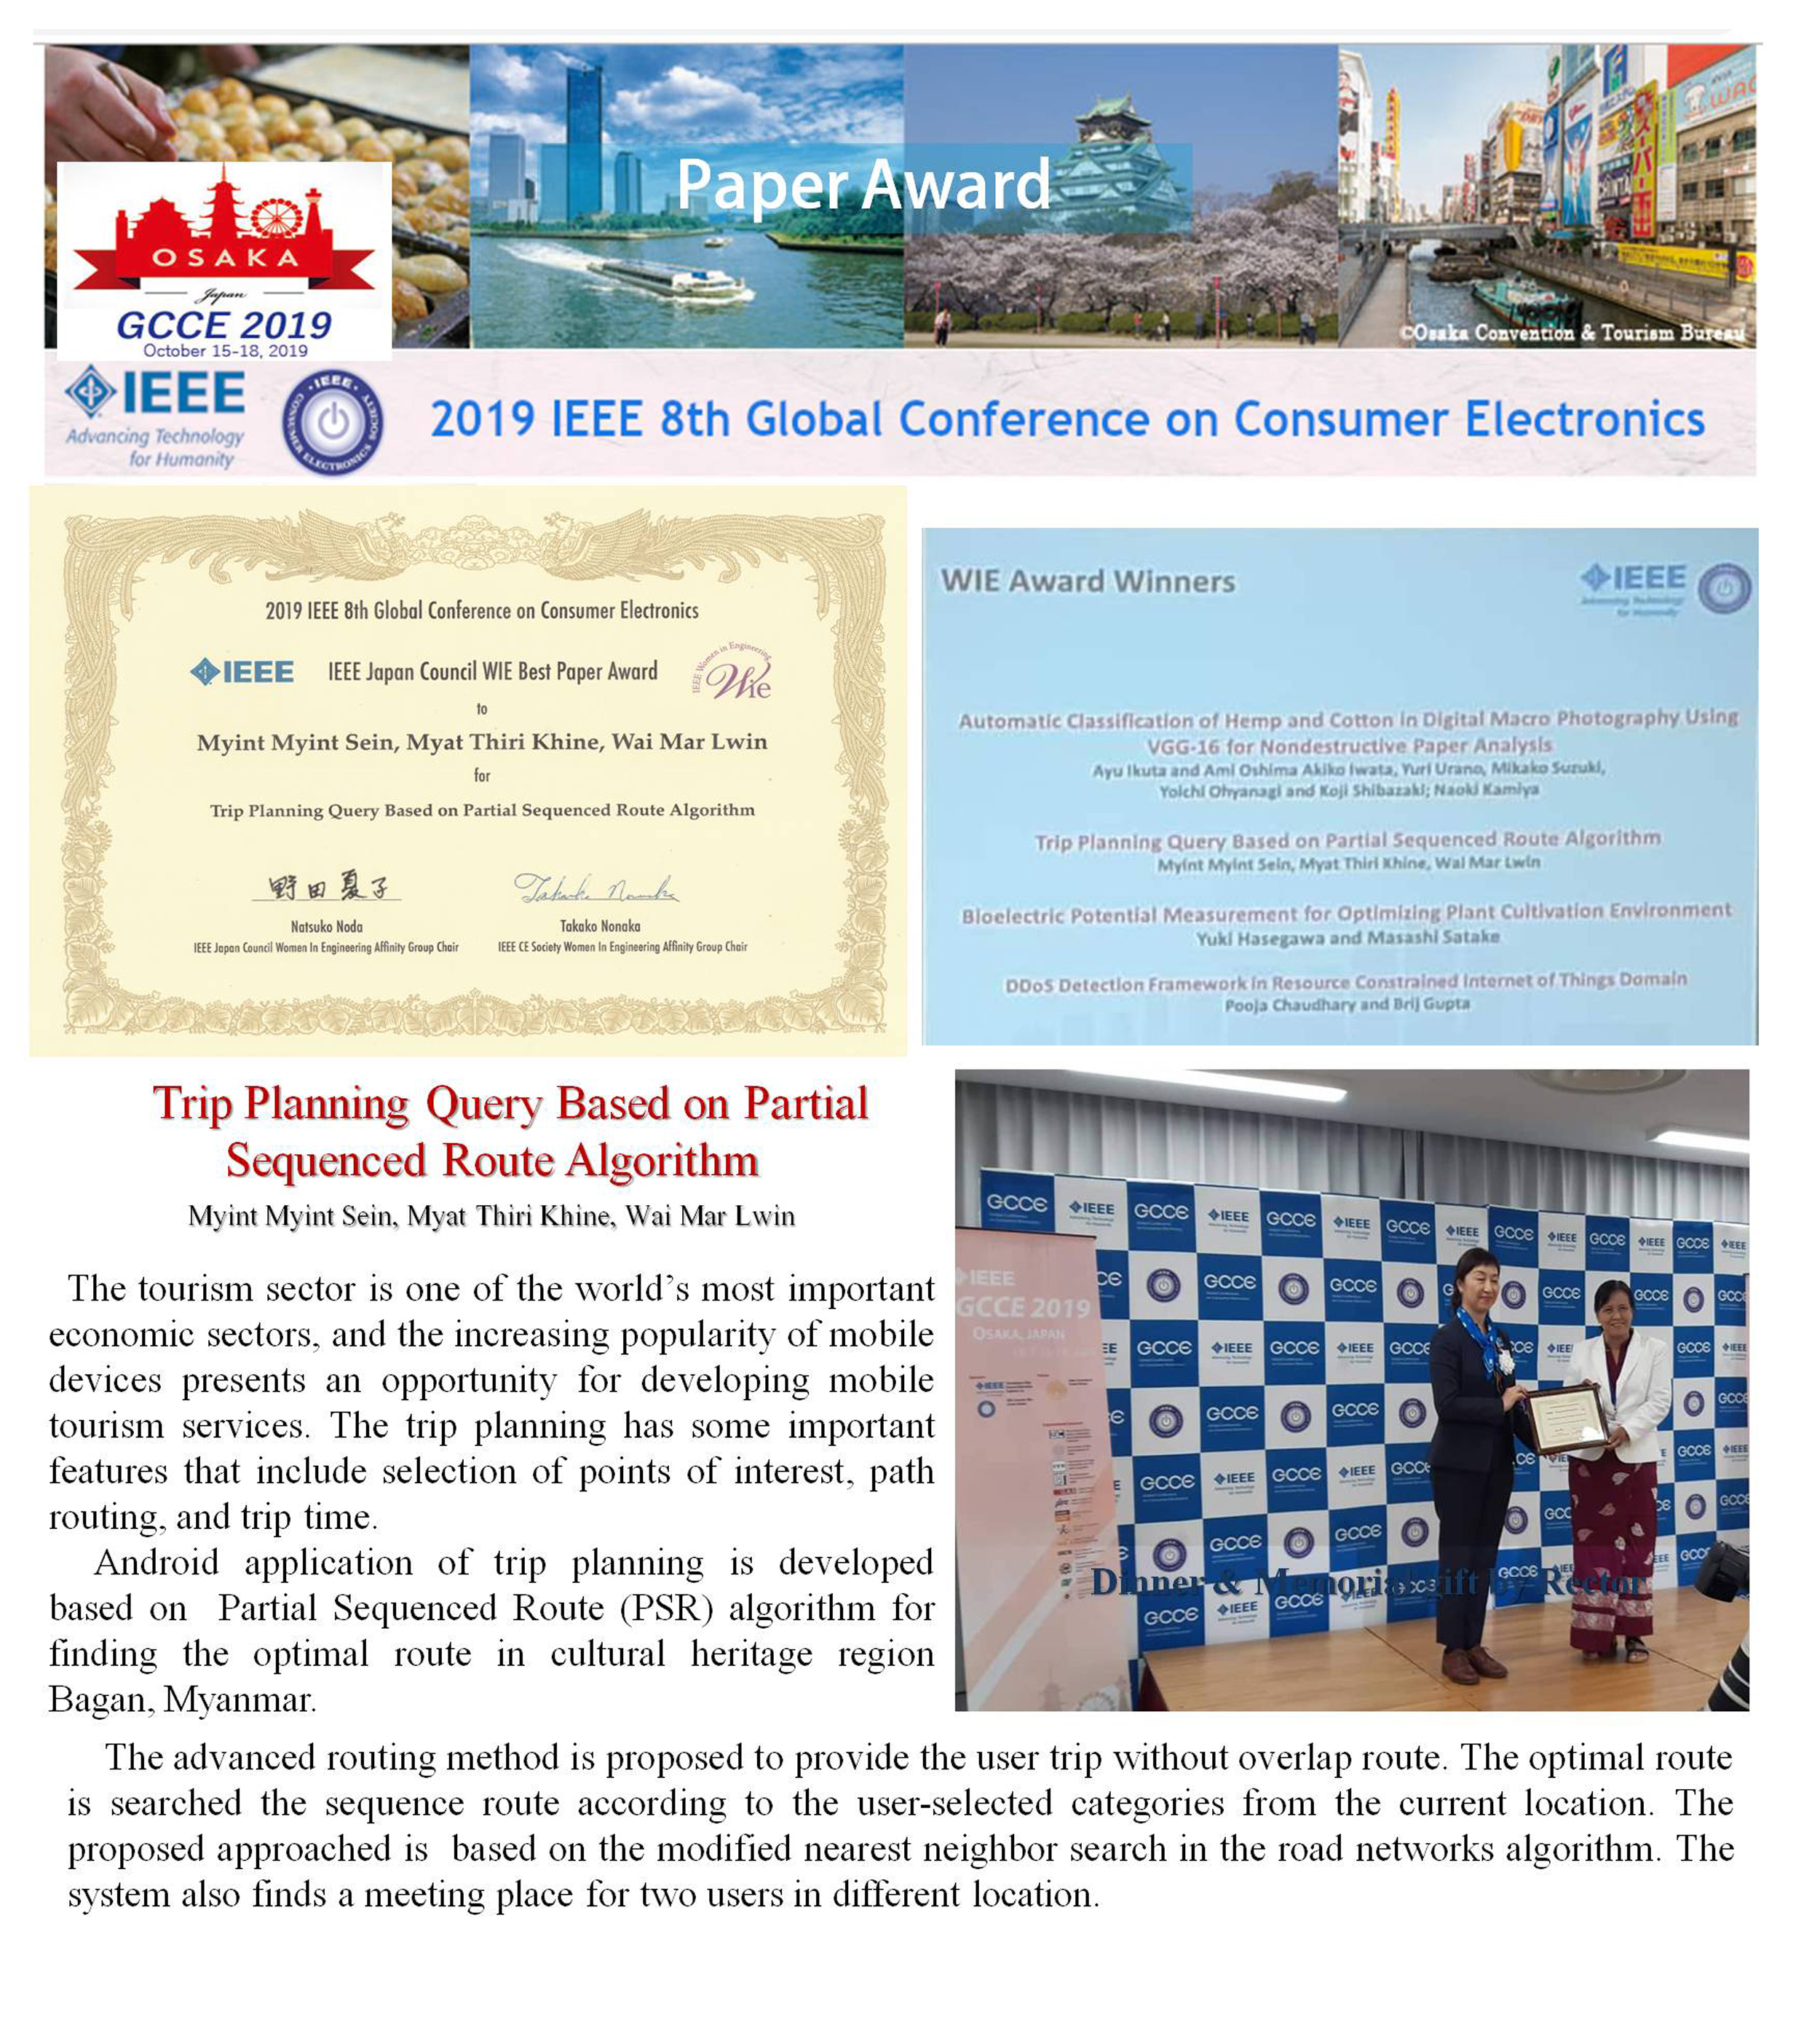 IEEE GCCE Conference Awards